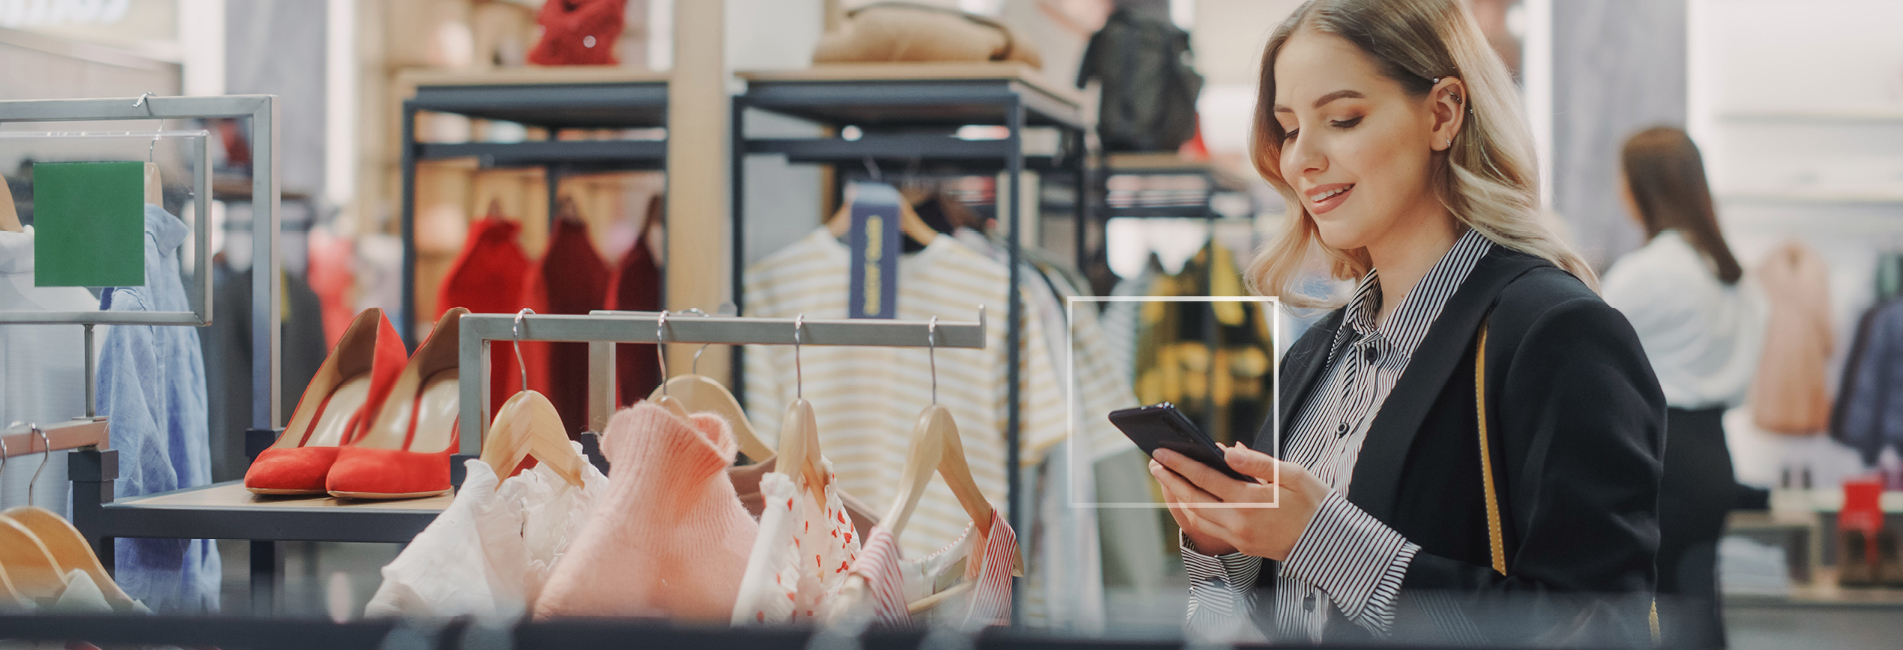 How To Create A Great Retail Customer Experience